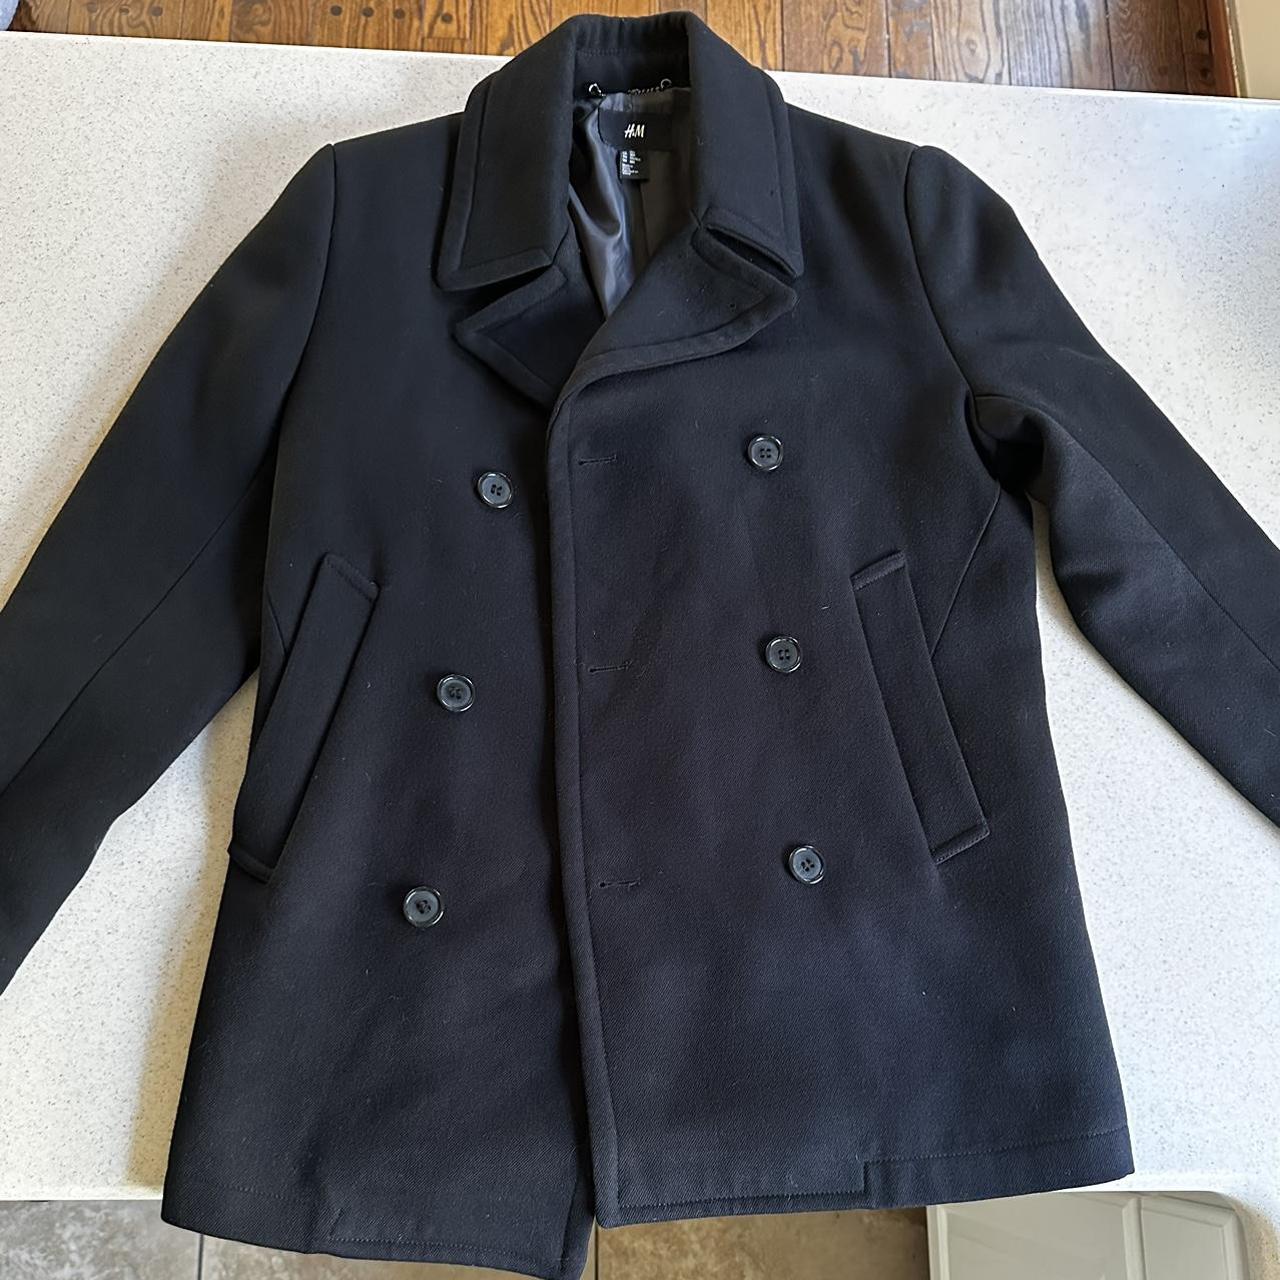 Black H&M Peacoat Double Breasted Jacket with... - Depop